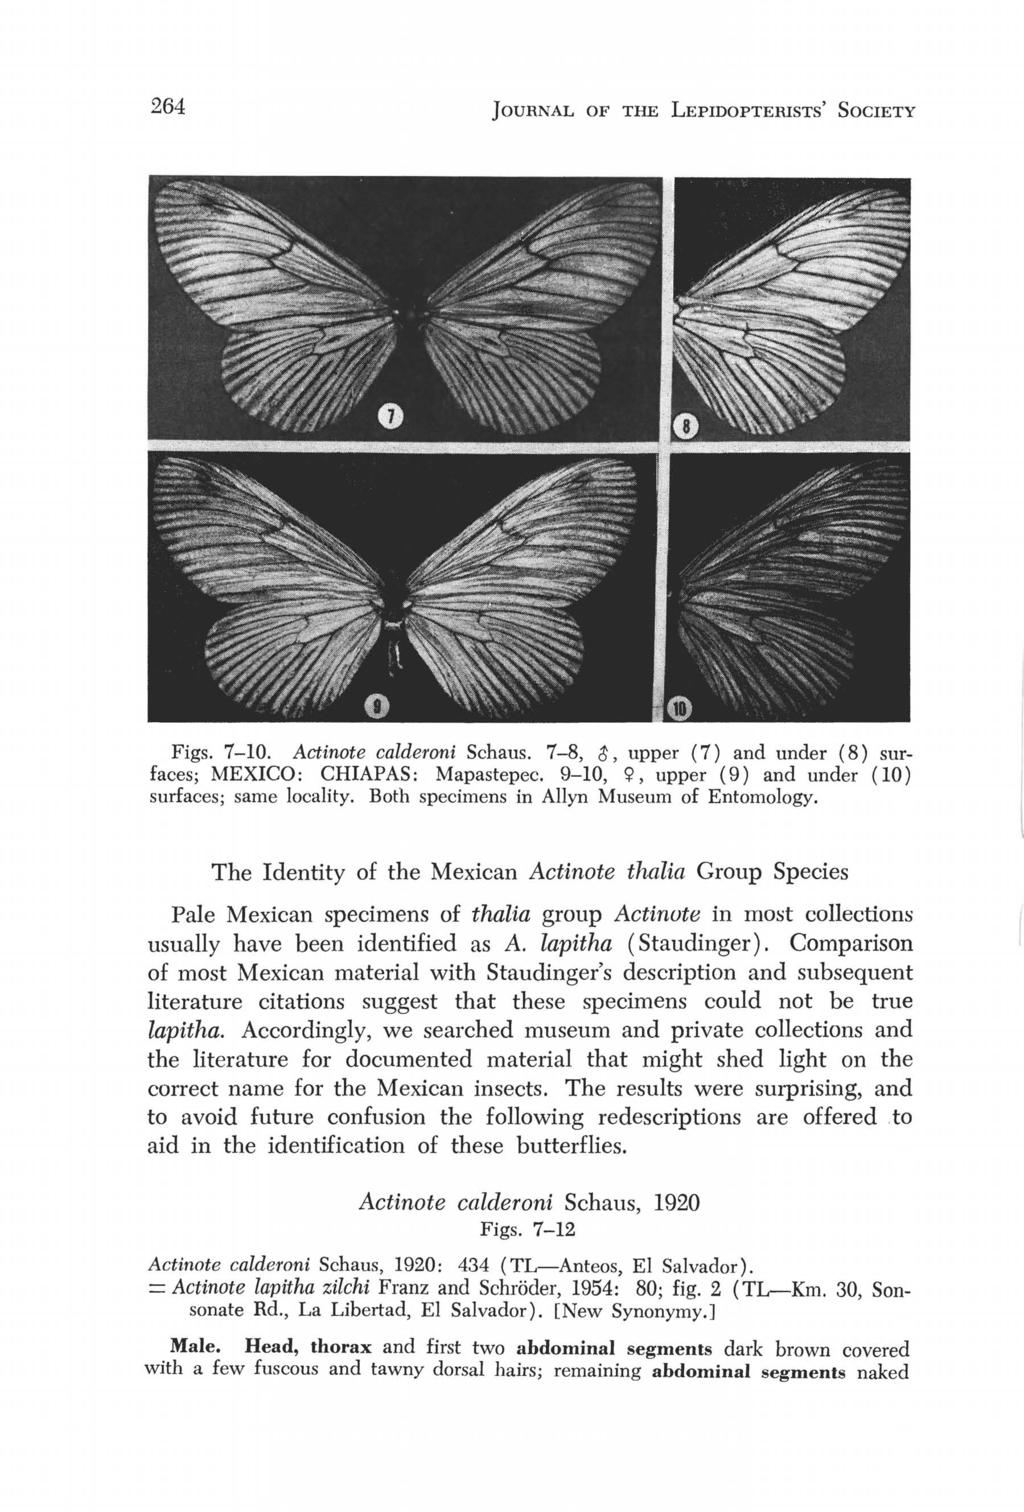 264 JOURNAL OF THE LEPIDOPTERISTS' SOCIETY Figs. 7-10. Actinote calderoni Schaus. 7-8, 3, upper (7) and under (8) surfaces; MEXICO: CHIAPAS: Mapastepec.